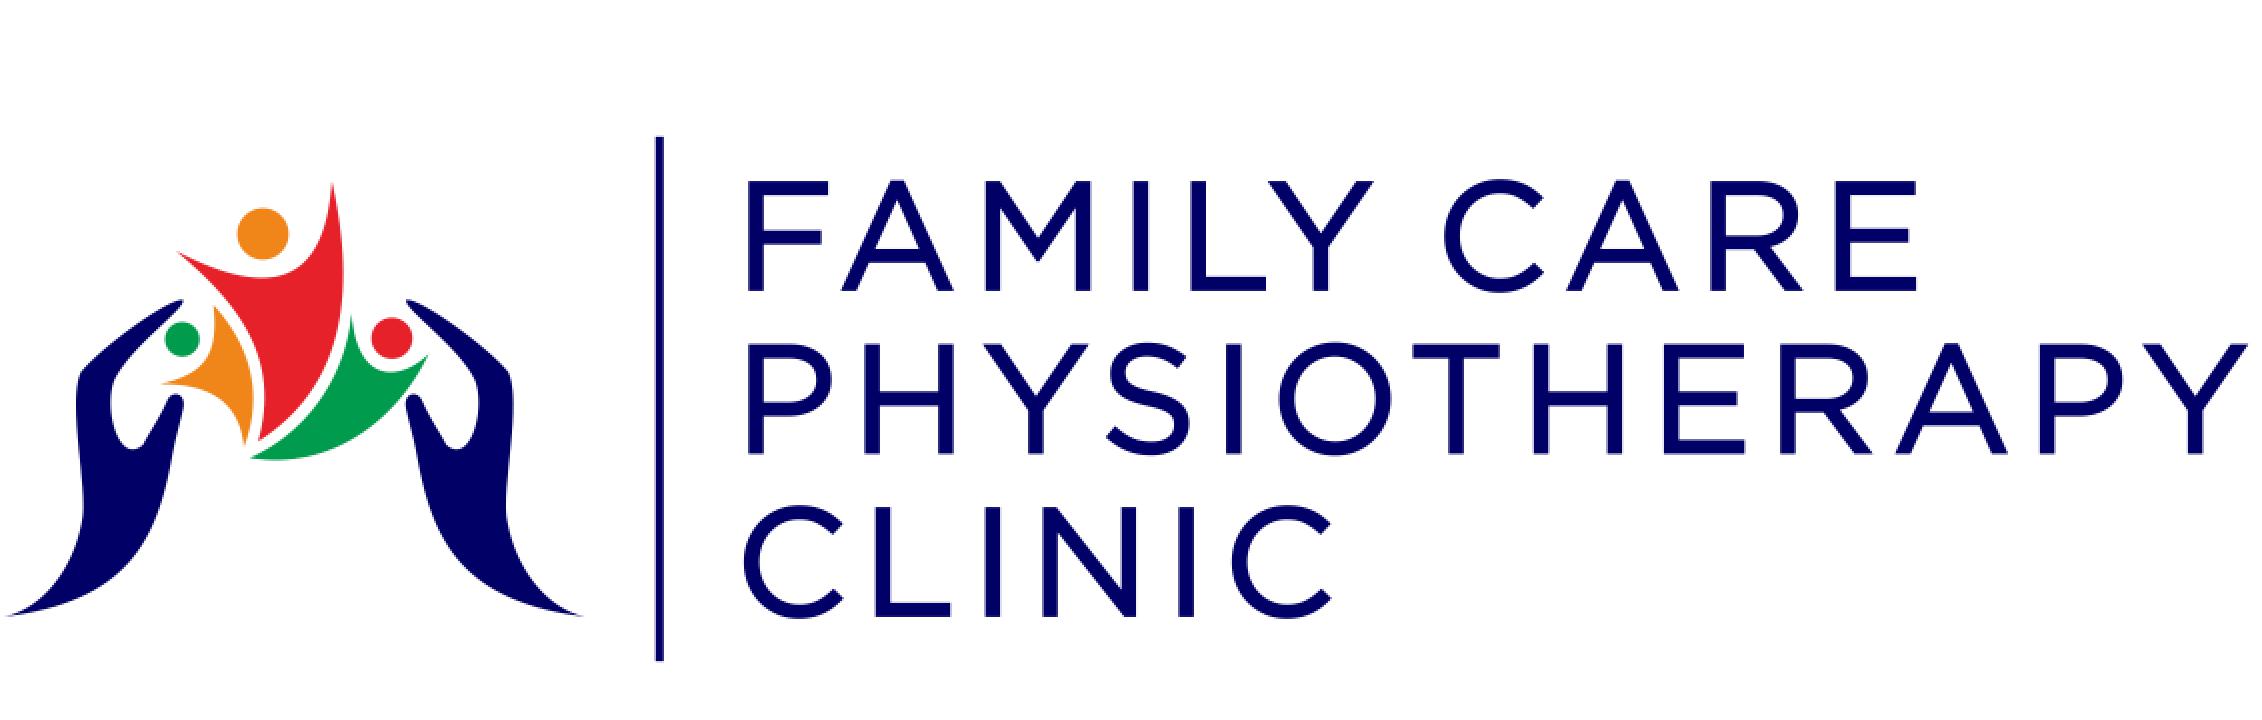 Family Care Physiotherapy Clinic Logo